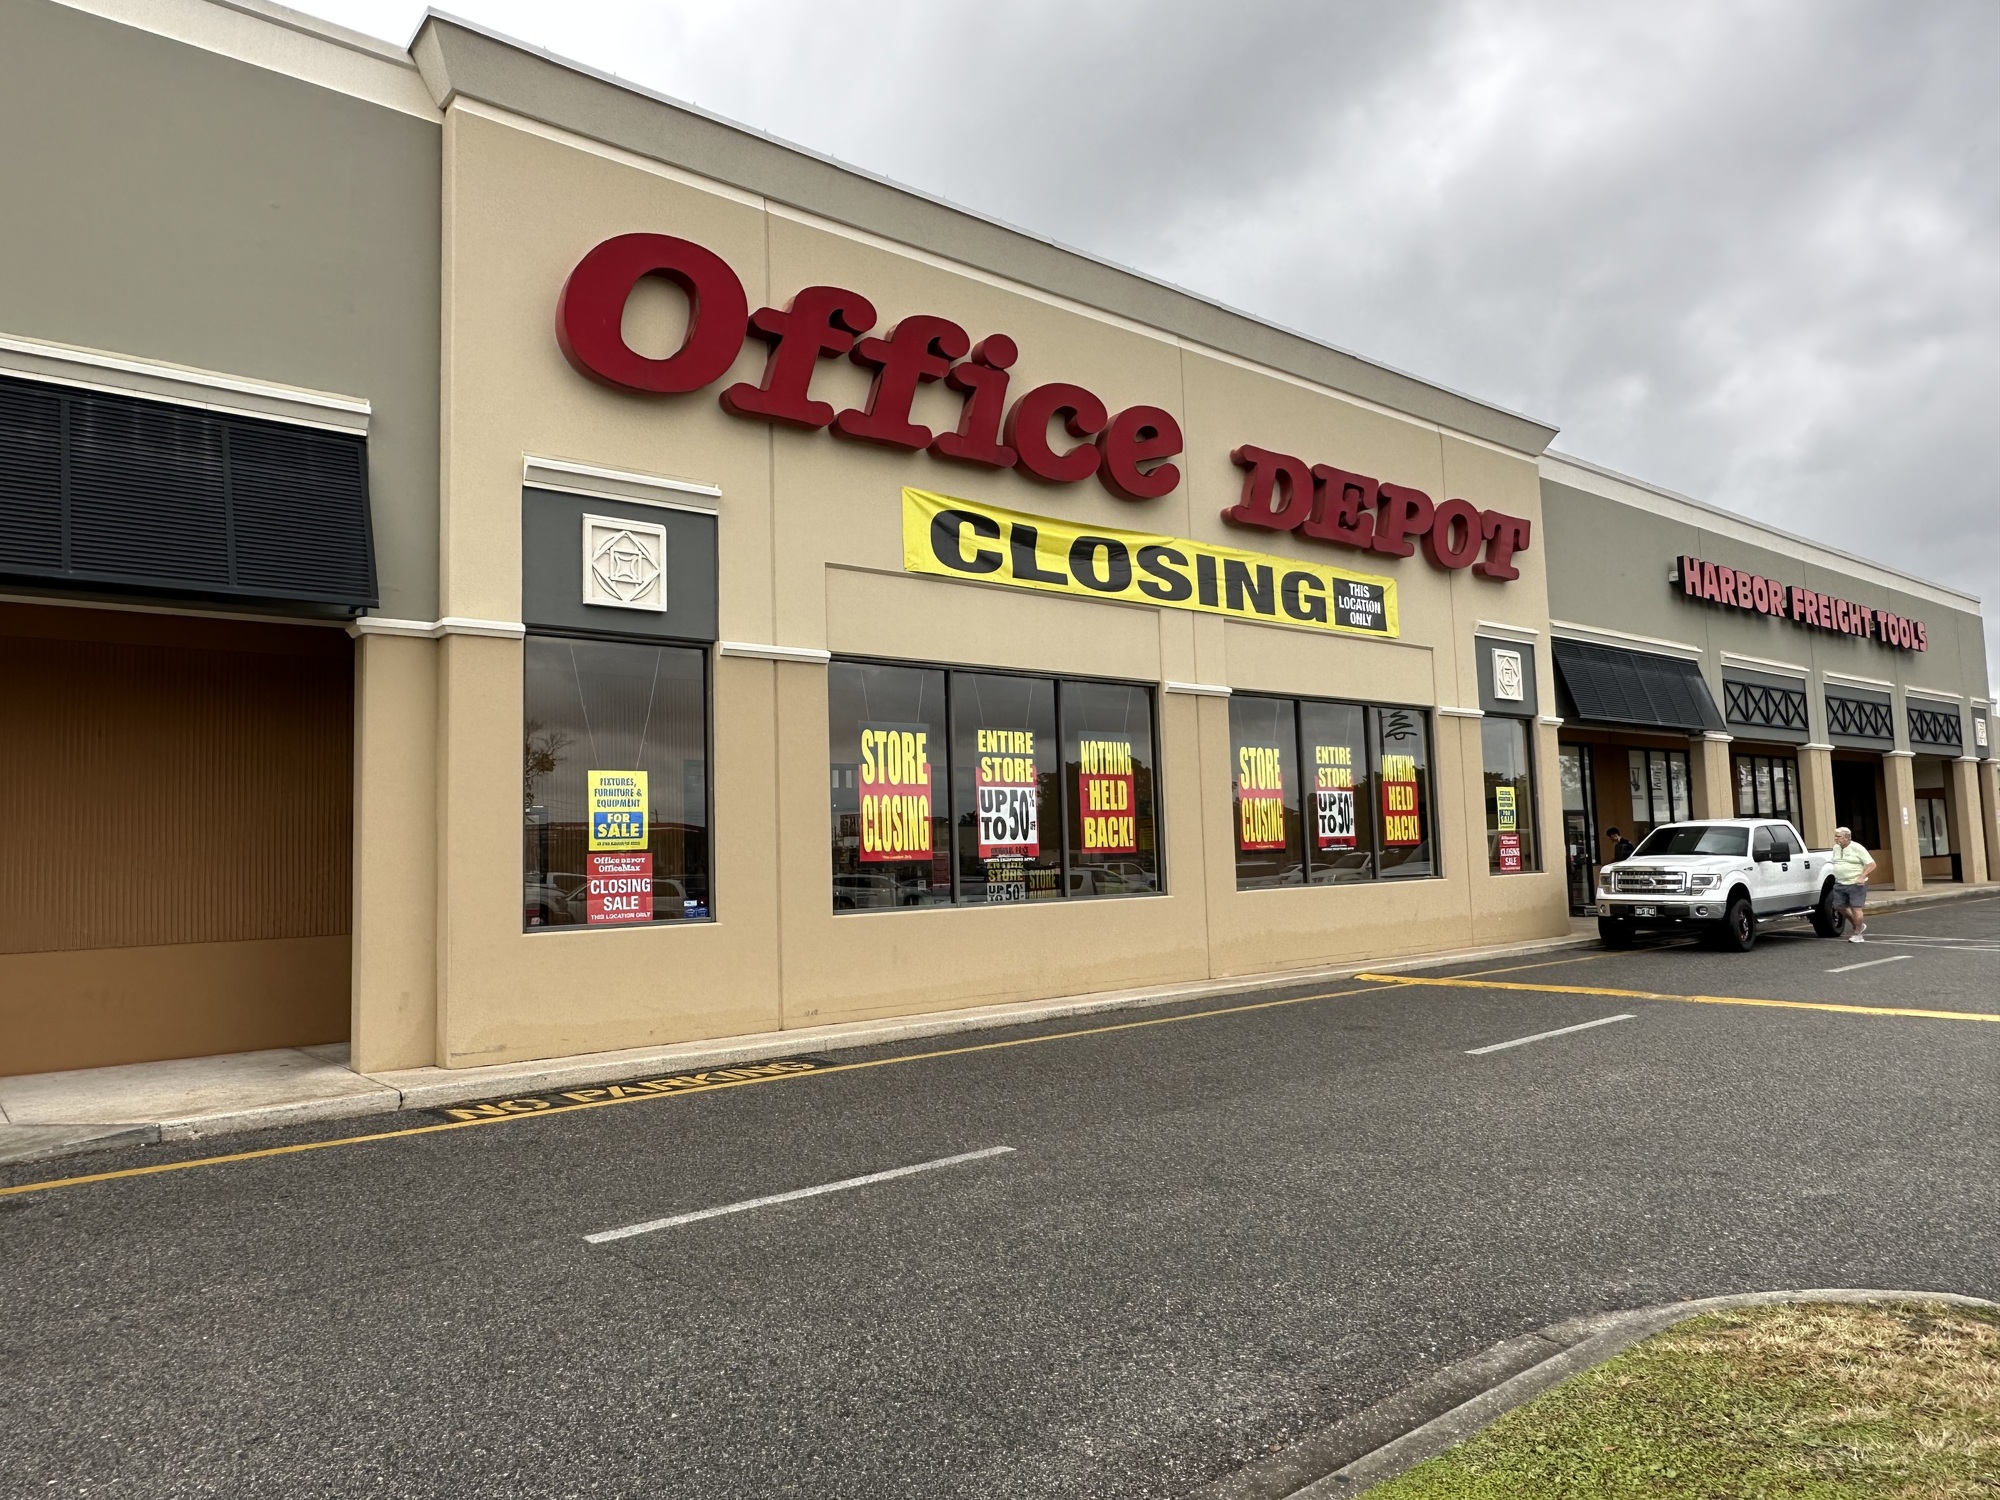 Office Depot is closing its store in the Crossroads Square shopping center at 8102 Blanding Blvd., north of Interstate 295.